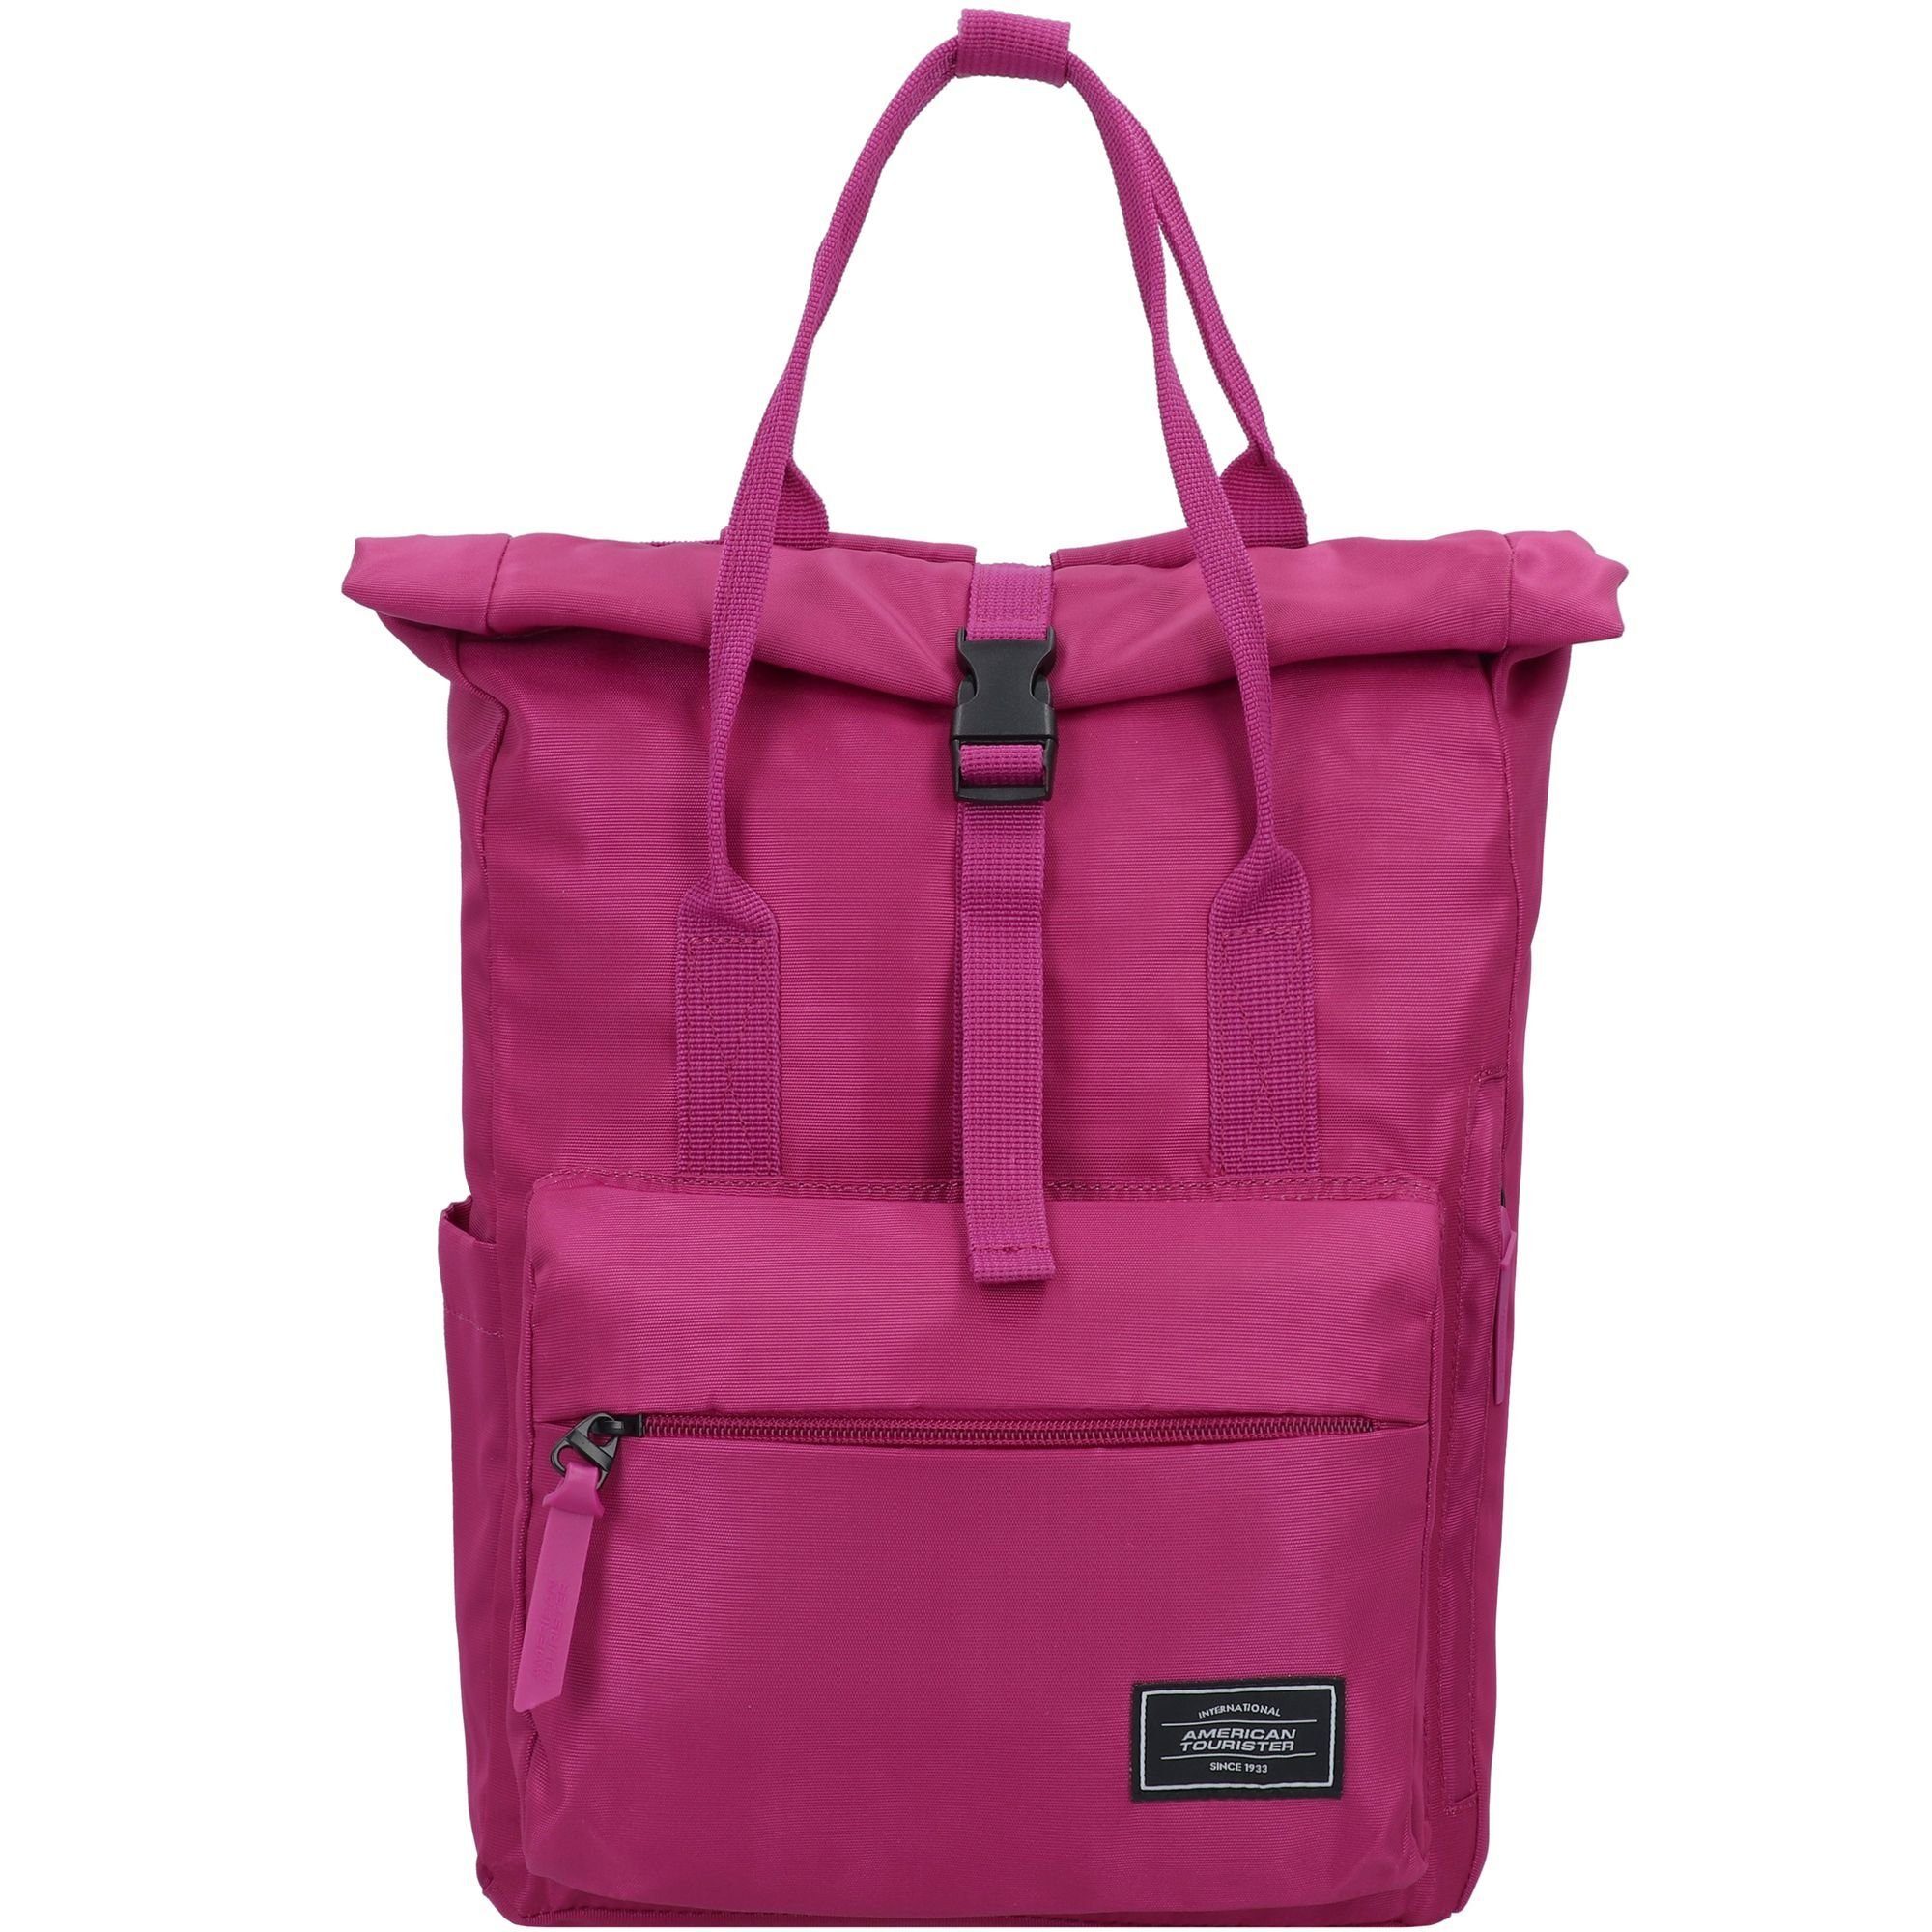 American Tourister® Cityrucksack Urban Groove, Polyester deep orchid